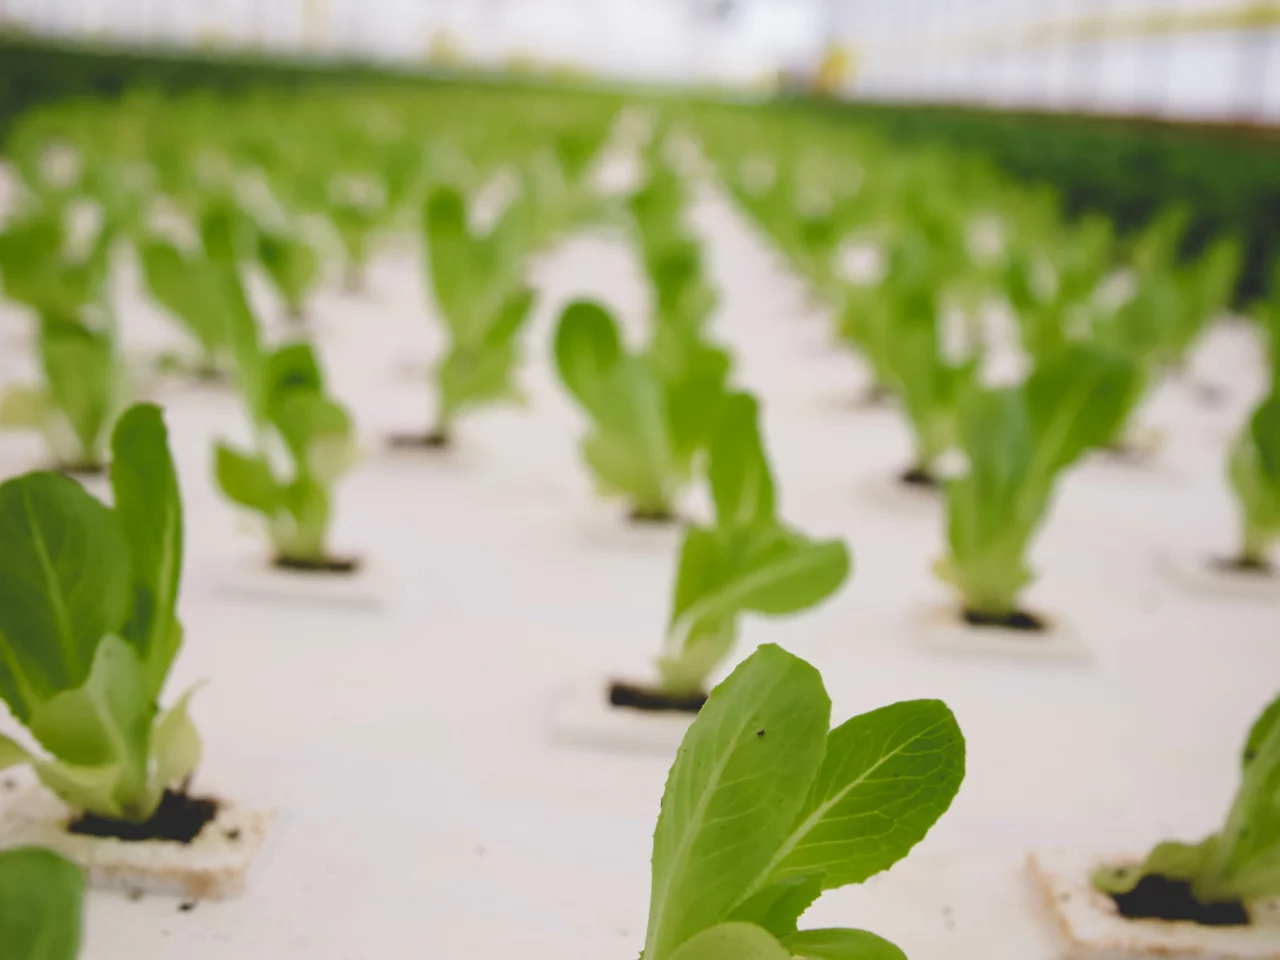 seedlings beginning to sprout in hydroponic farm